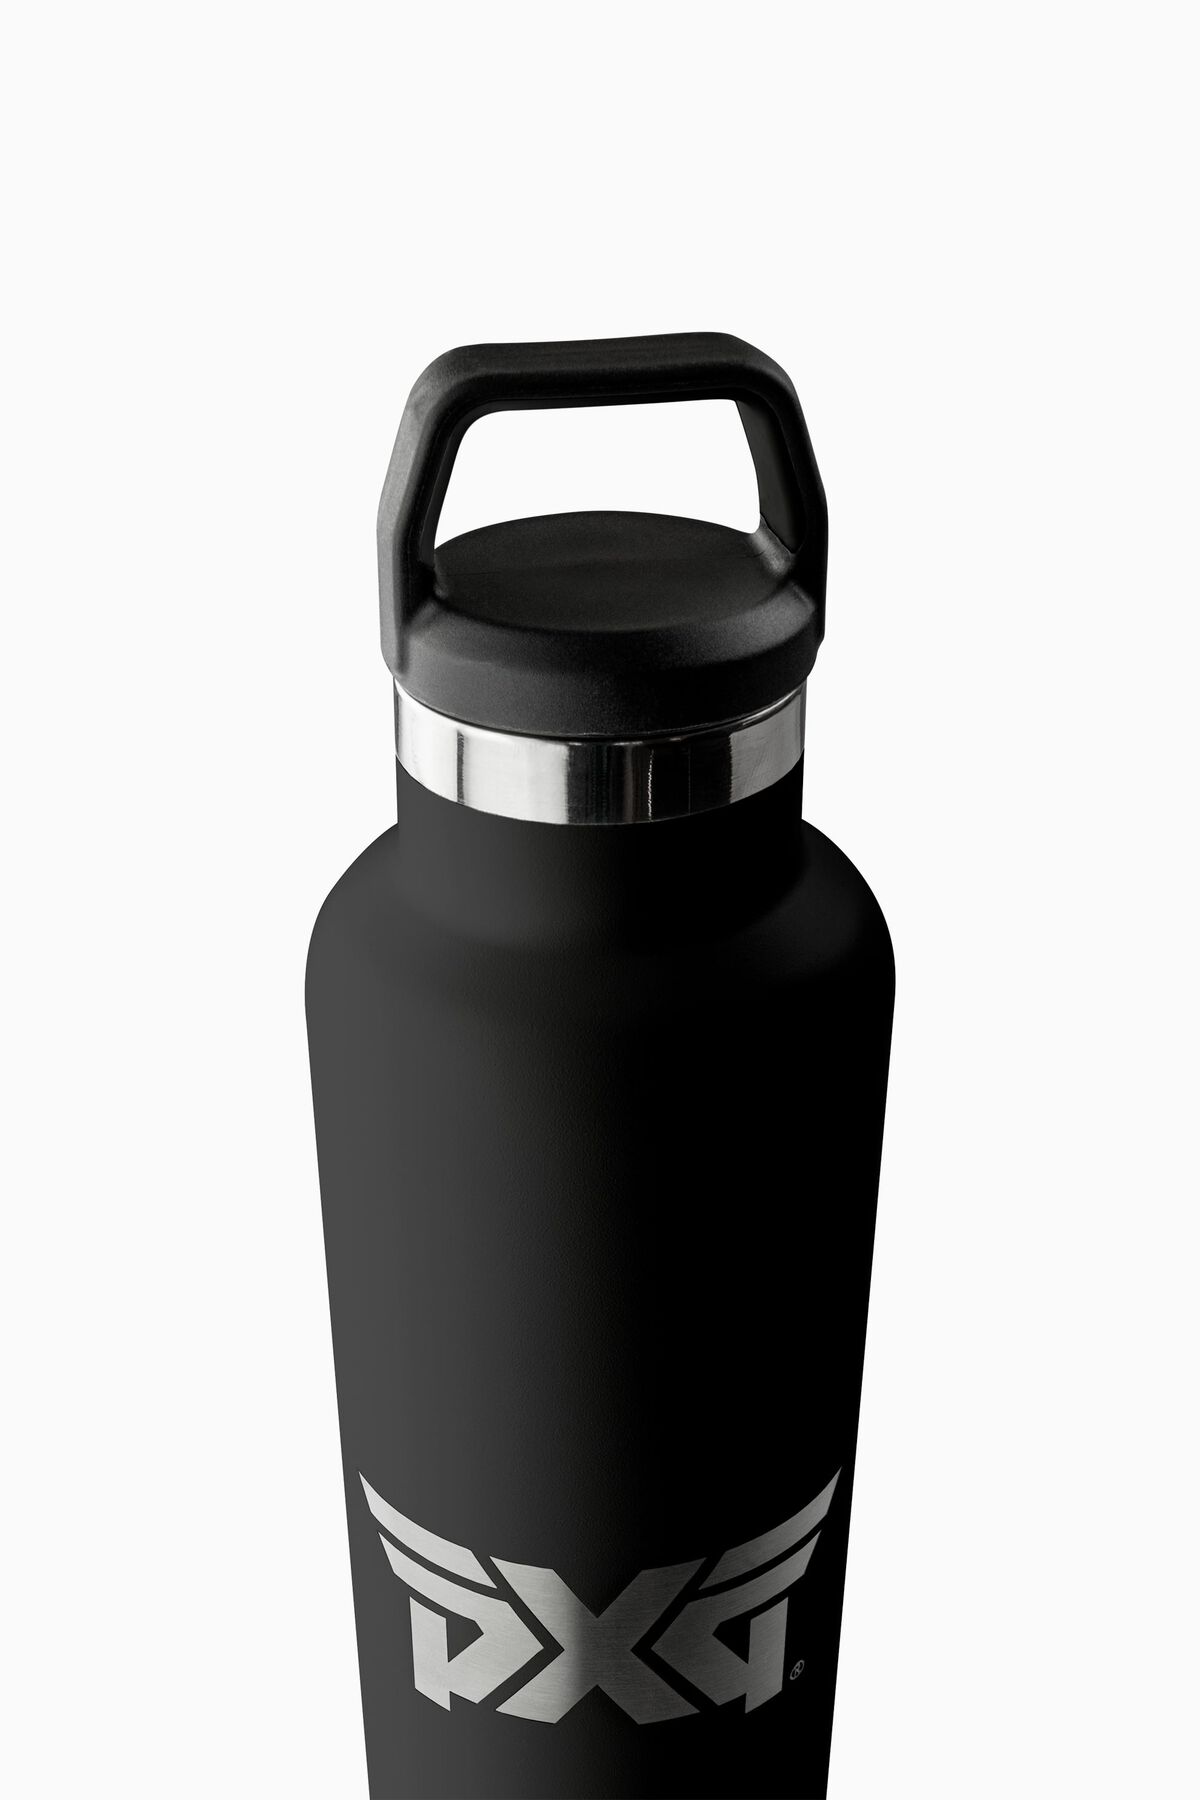 26 oz. PXG Water Bottle  Shop the Highest Quality Golf Apparel, Gear,  Accessories and Golf Clubs at PXG